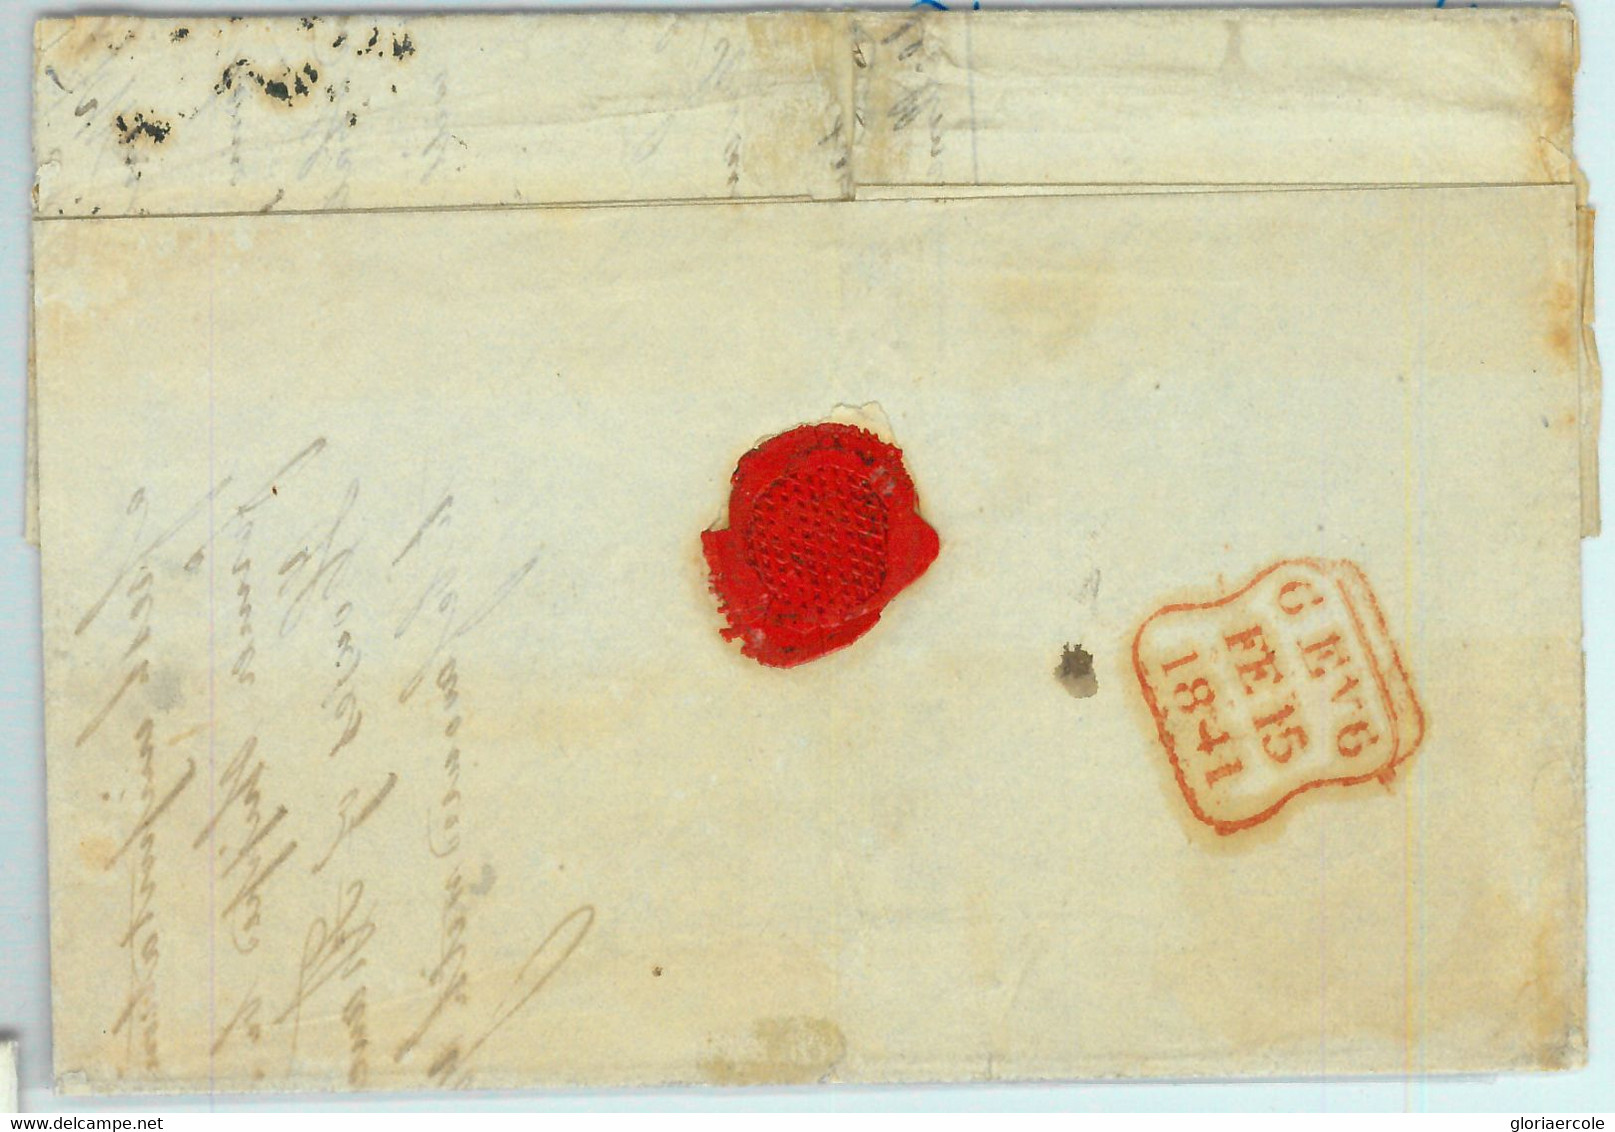 BK0663 - GB Great Brittain - POSTAL HISTORY - PENNY BLACK On COVER London 1841 - Lettres & Documents